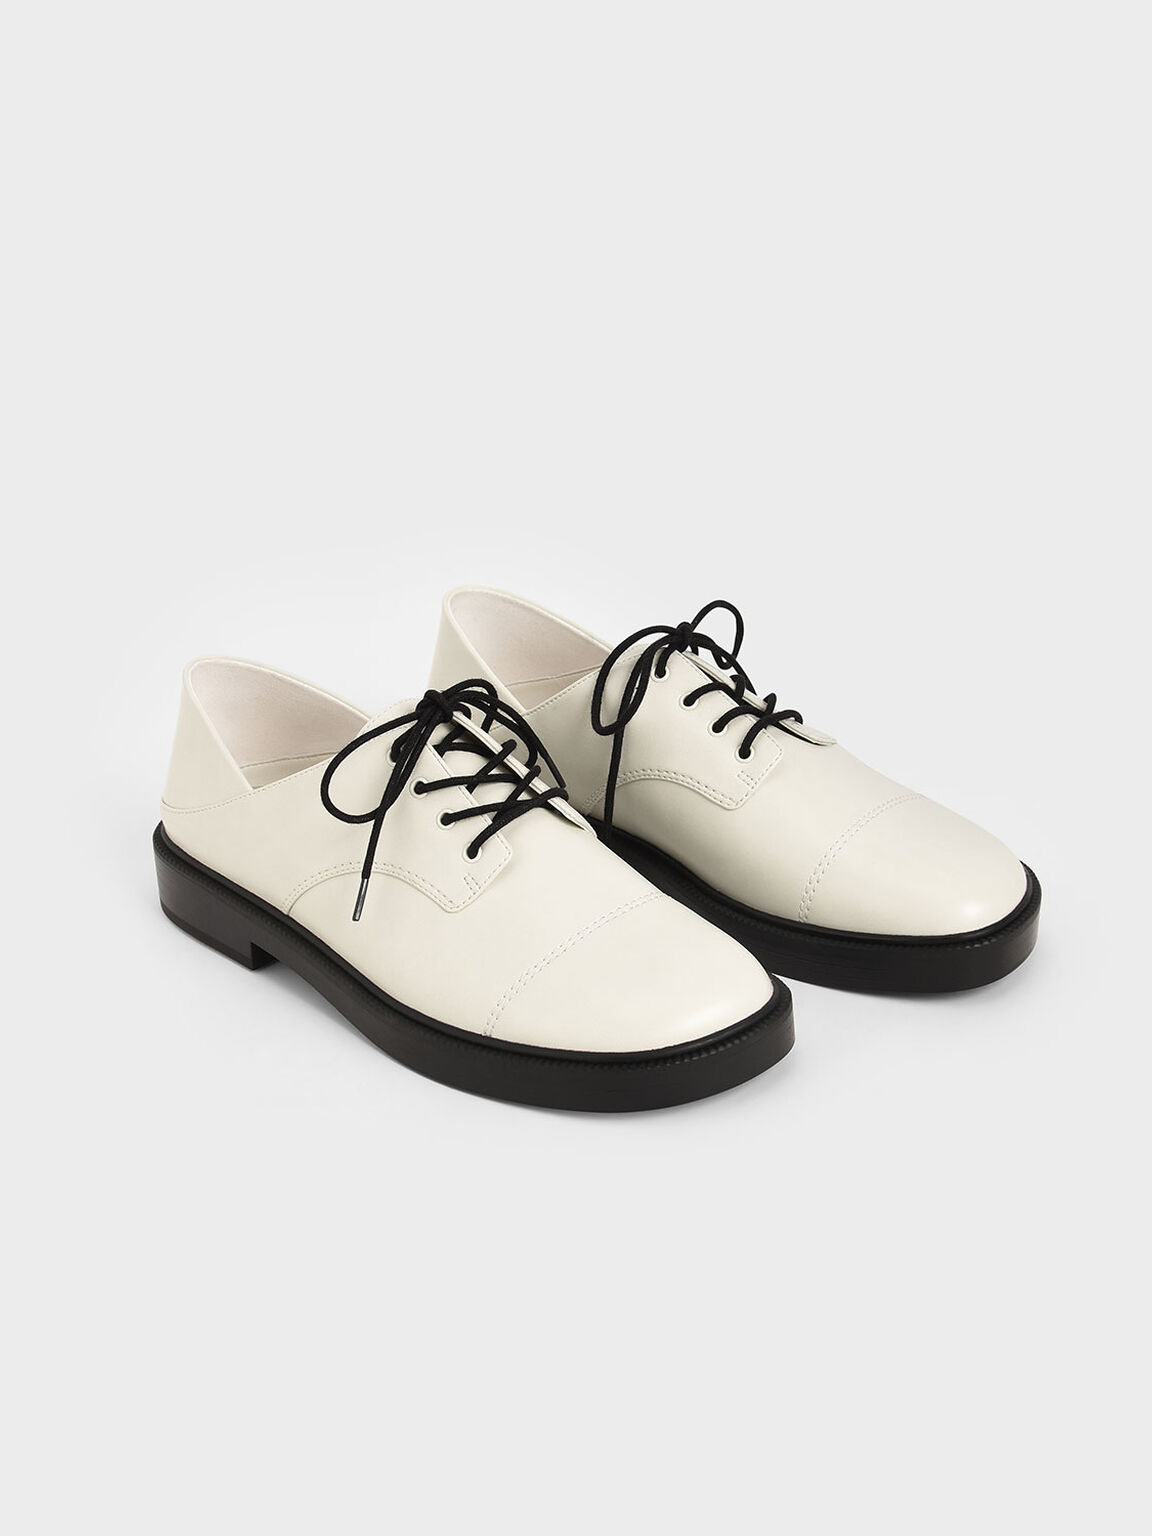 Chunky Sole Oxford Shoes, Blanco tiza, hi-res